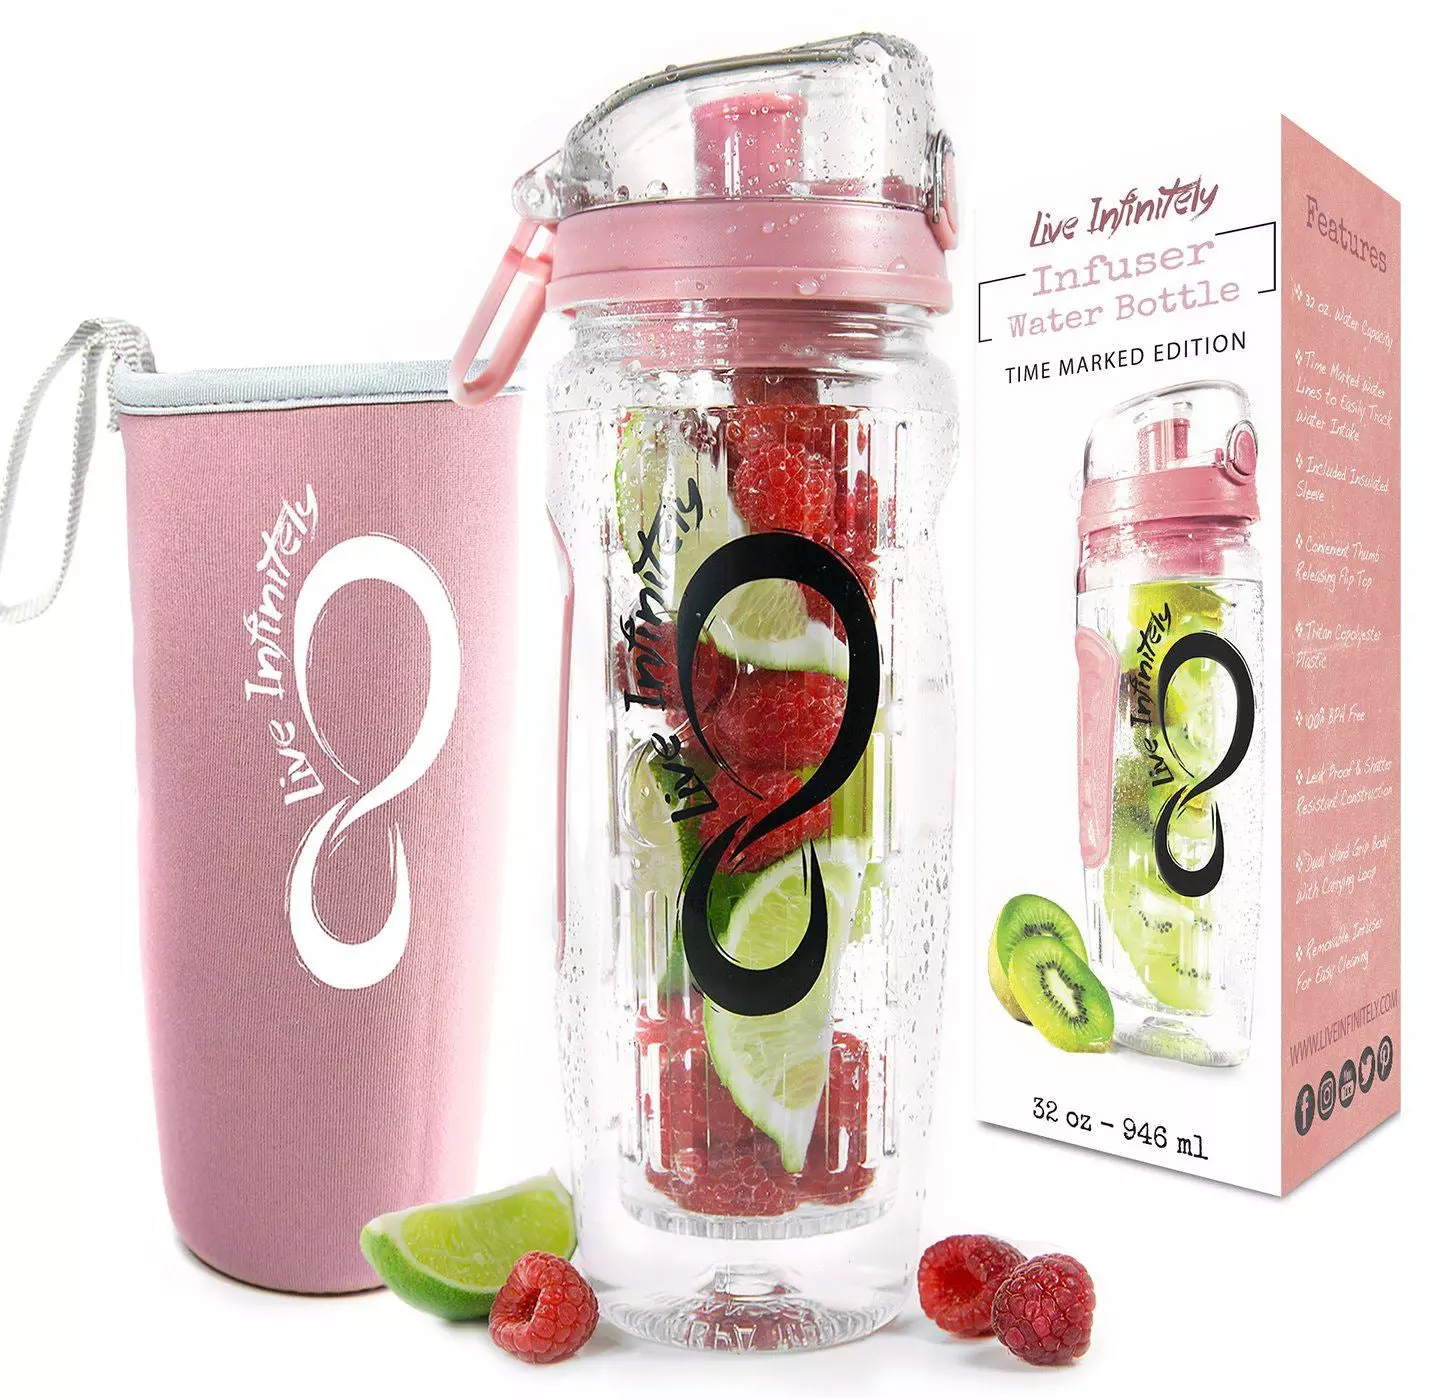 Best Fruit Infused Water Bottles Guide Review - Go Green Travel Green